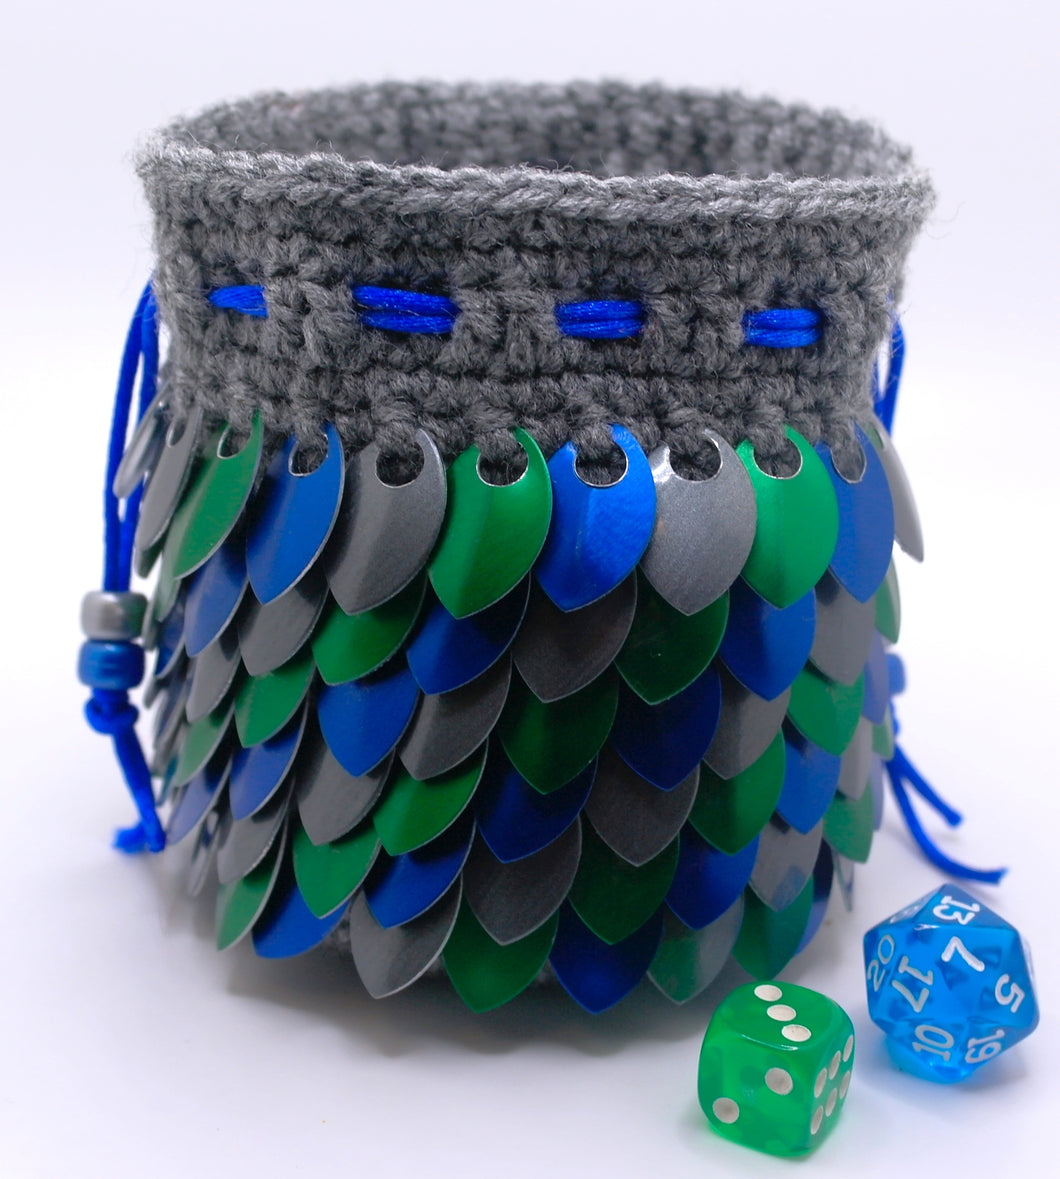 Dice bag made from gray yarn with blue, green, and graphite metallic dragon scales and a blue drawstring